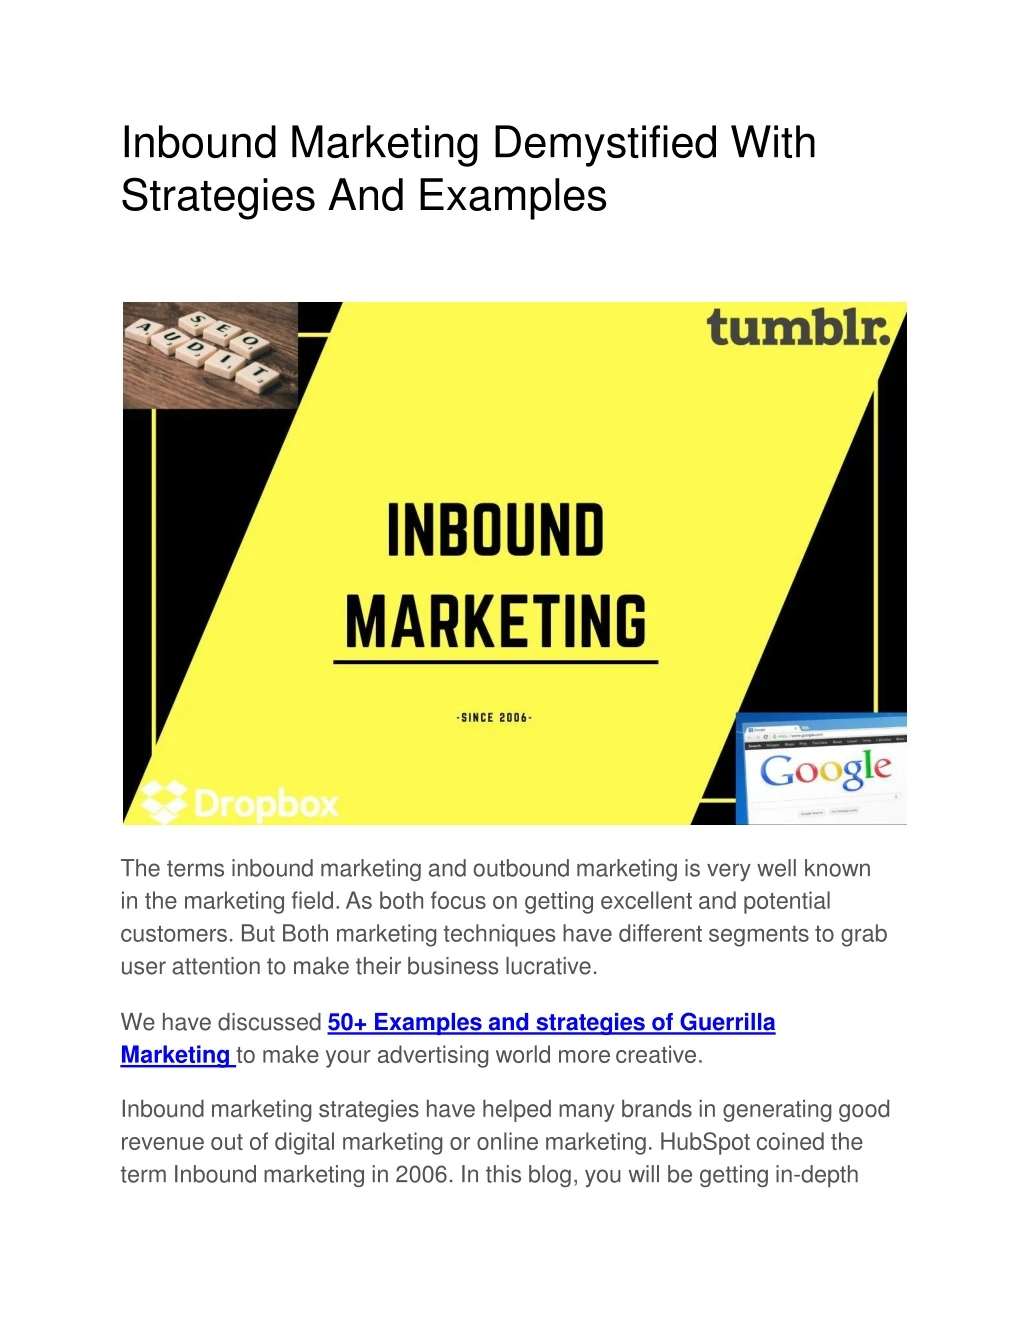 inbound marketing demystified with strategies and examples